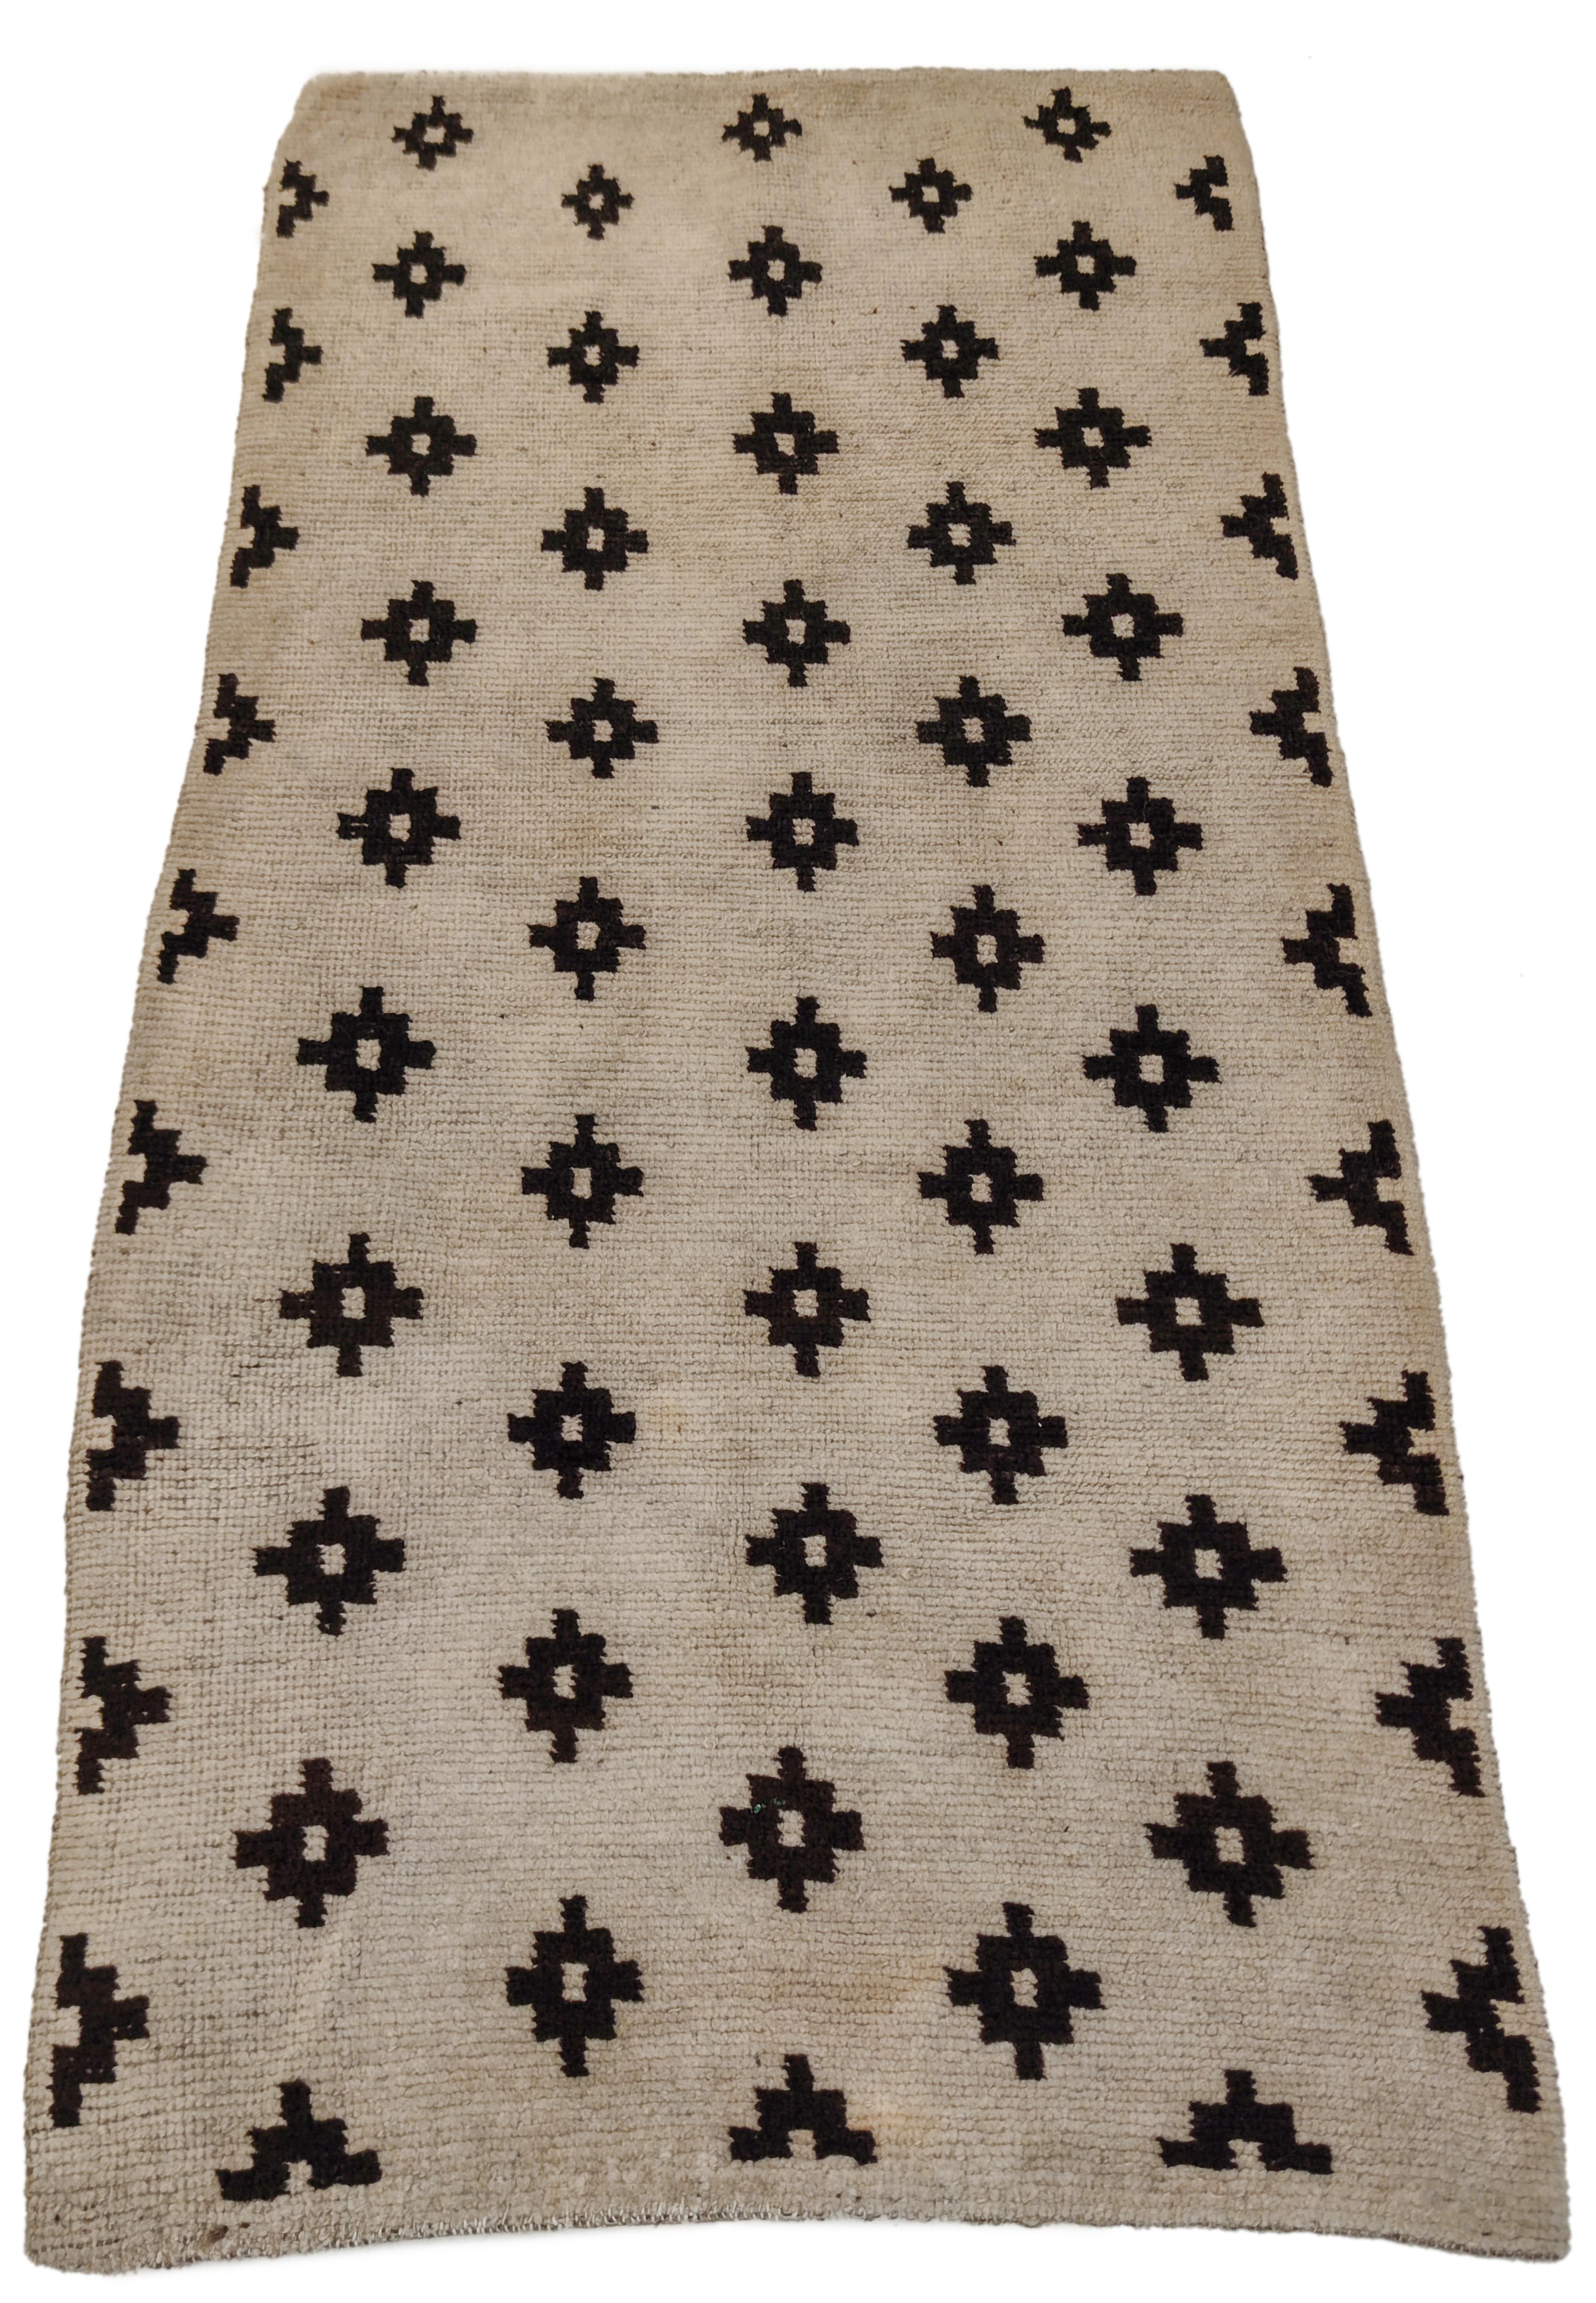 Hand-Knotted Antique White Ground Tibetan Khaden Rug with Black Stepped Diamonds For Sale